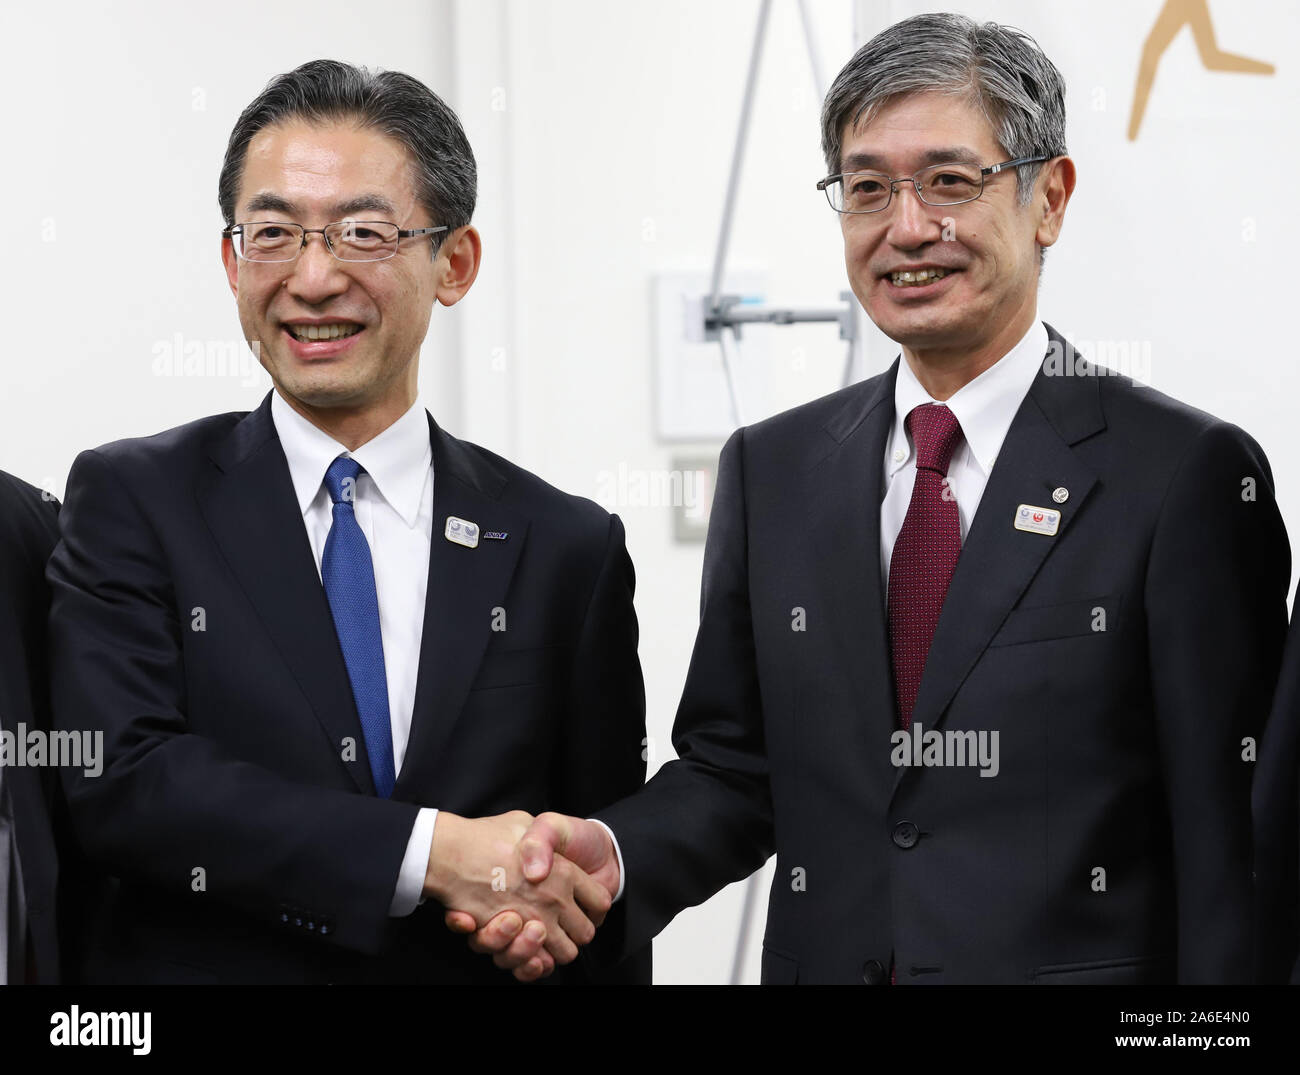 Tokyo, Japan. 25th Oct, 2019. All Nippon Airways (ANA) president Yuji Hirako (L) shakes hands with Japan Airlines (JAL) president Yuji Akasaka (R) as they display the aircraft design to deliver Olympic flame from Greece in Tokyo on Friday, October 25, 2019. Judo Olympic gold medalist Tadahiro Nomura and women's wrestling Olympic goldmedalist saori Yoshida will carry Olympic flame back to Japan next March for Tokyo 2020 Olympics torch relay. Credit: Yoshio Tsunoda/AFLO/Alamy Live News Stock Photo